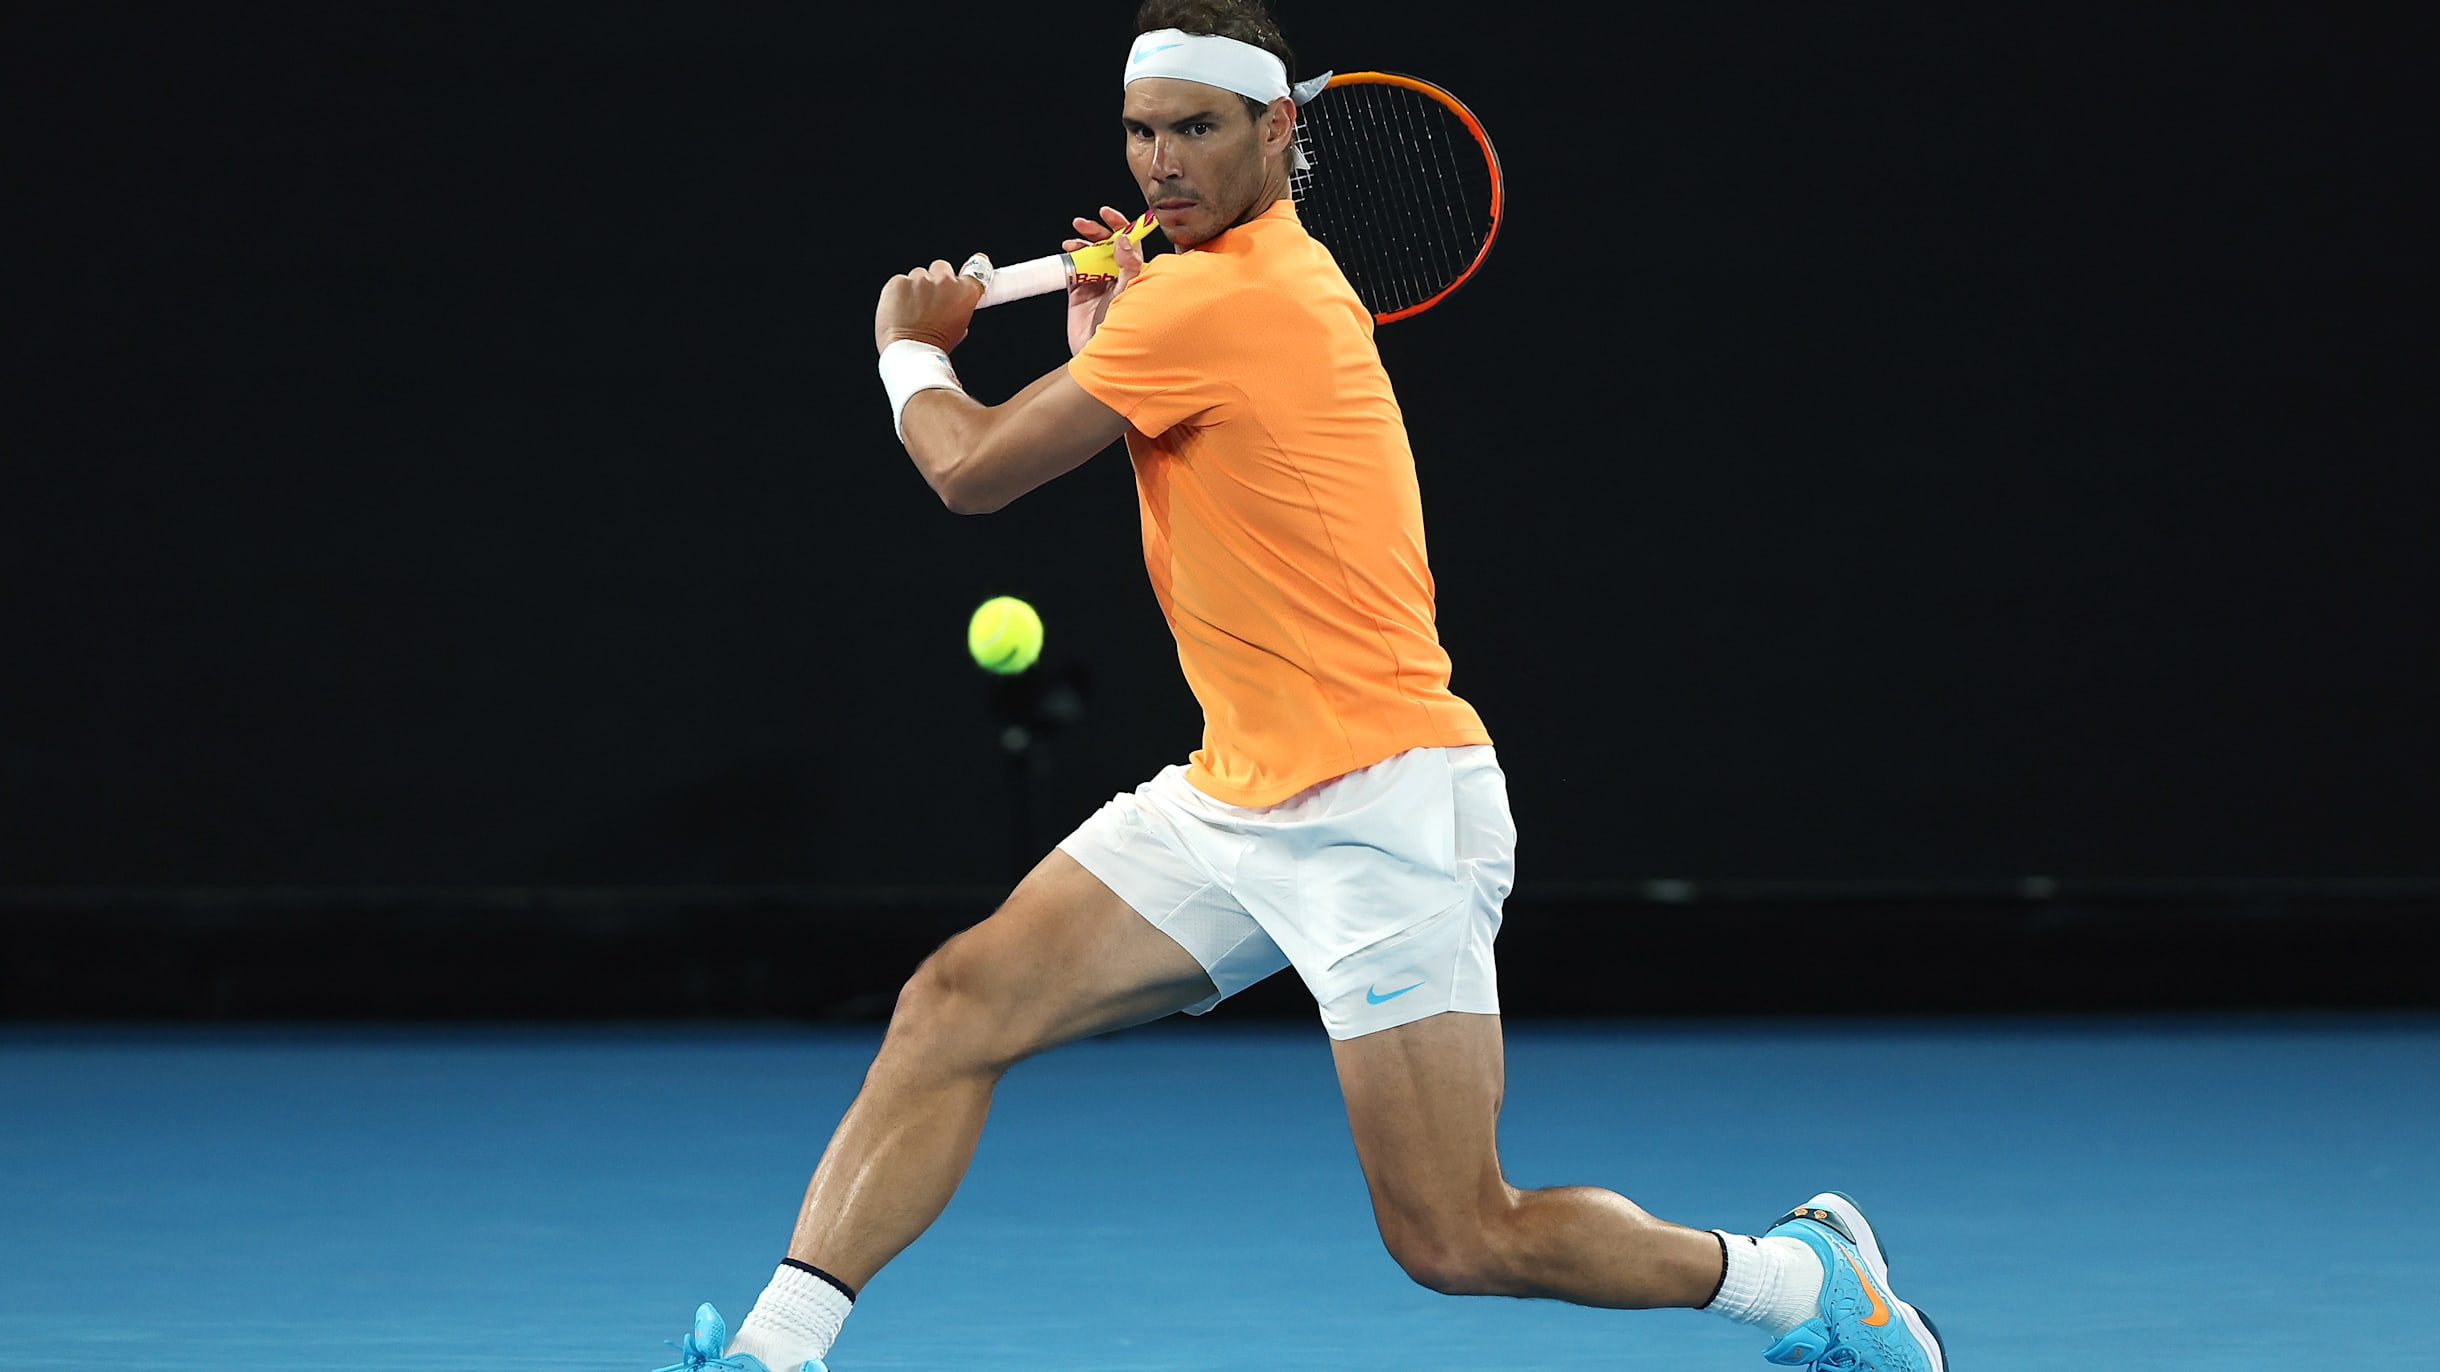 Rafael Nadal set to return to tennis in Brisbane after nearly a year away